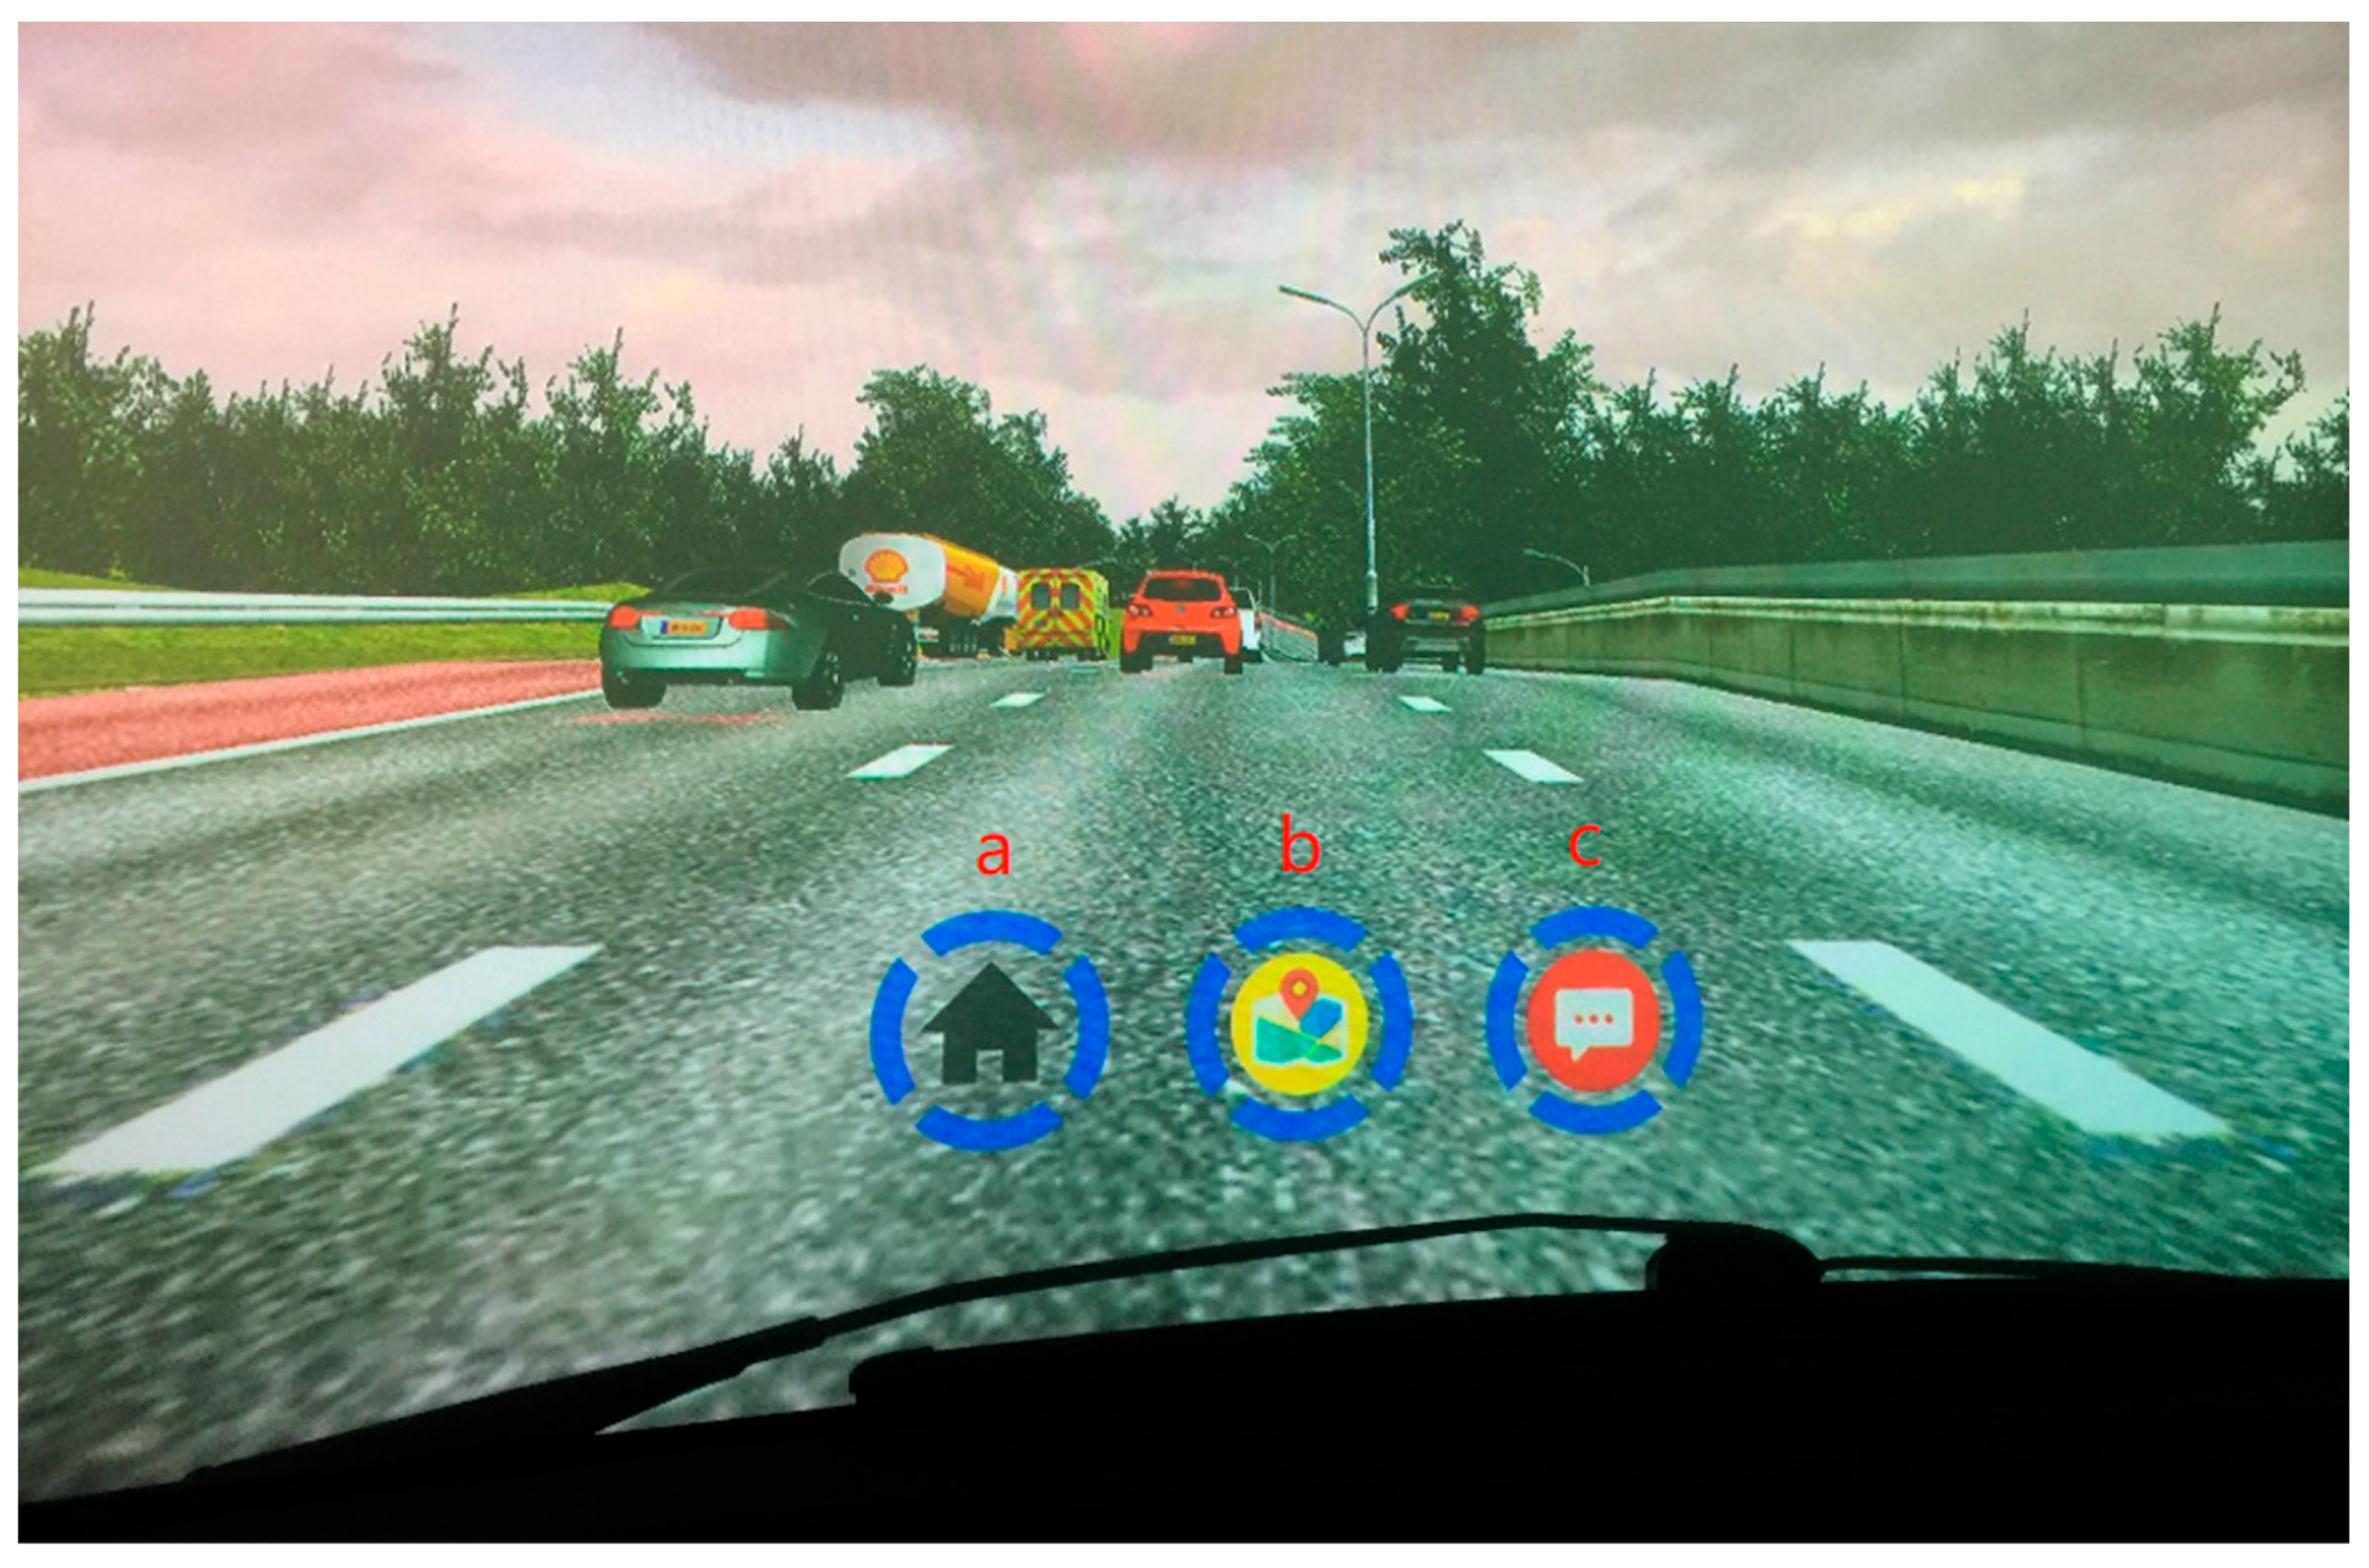 Engineers are working on an advanced 3D head-up display for in-car use